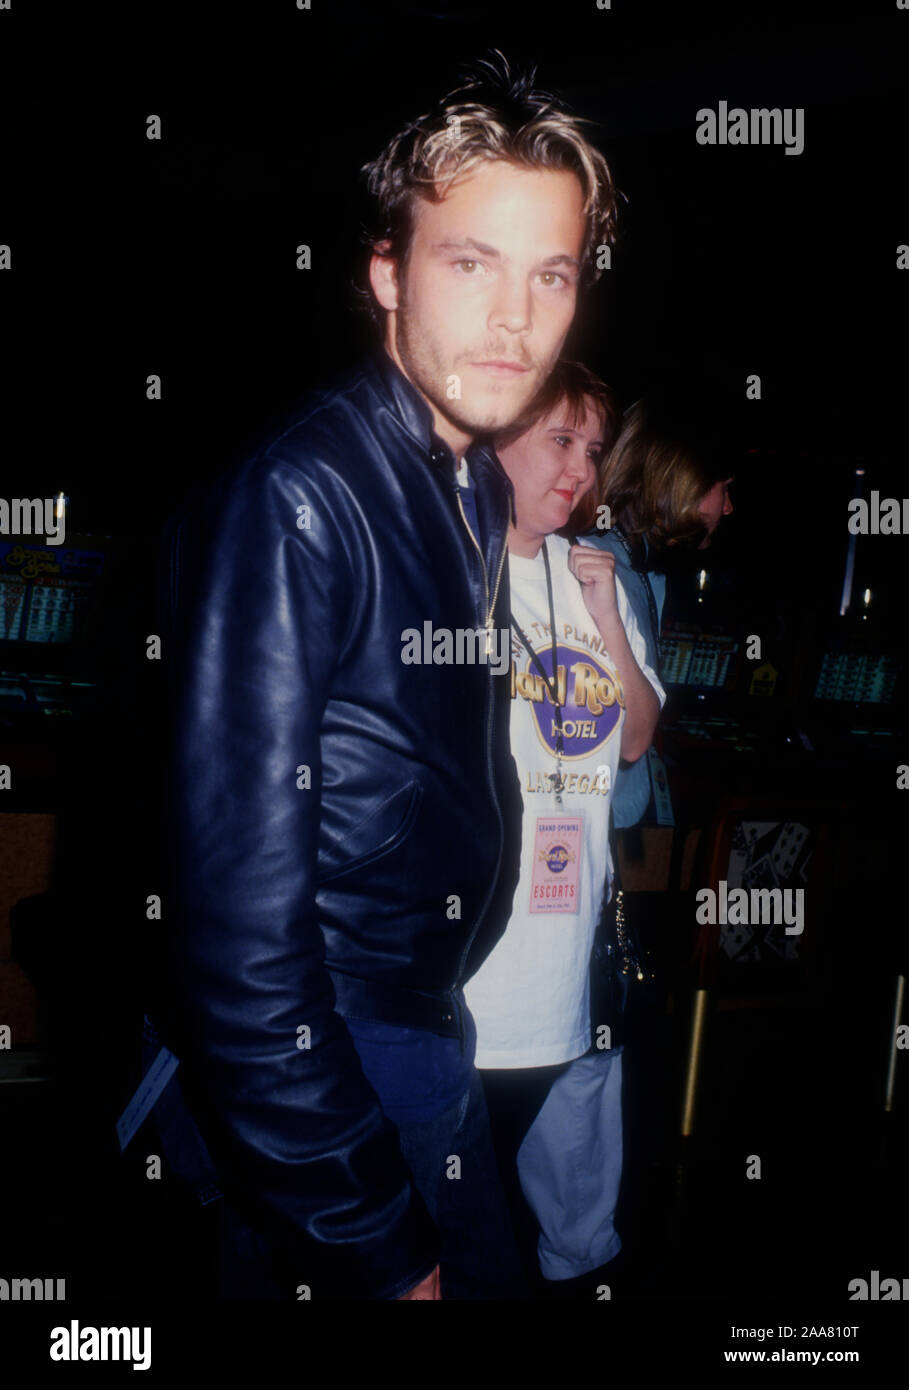 Las Vegas, Nevada, USA 10th March 1995 Actor Stephen Dorff attends the Grand Opening Celebration of the Hard Rock Hotel hosted by Peter Morgan on March 10, 1995 at The Hard Rock Hotel Las Vegas in Las Vegas, Nevada, USA. Photo by Barry King/Alamy Stock Photo Stock Photo